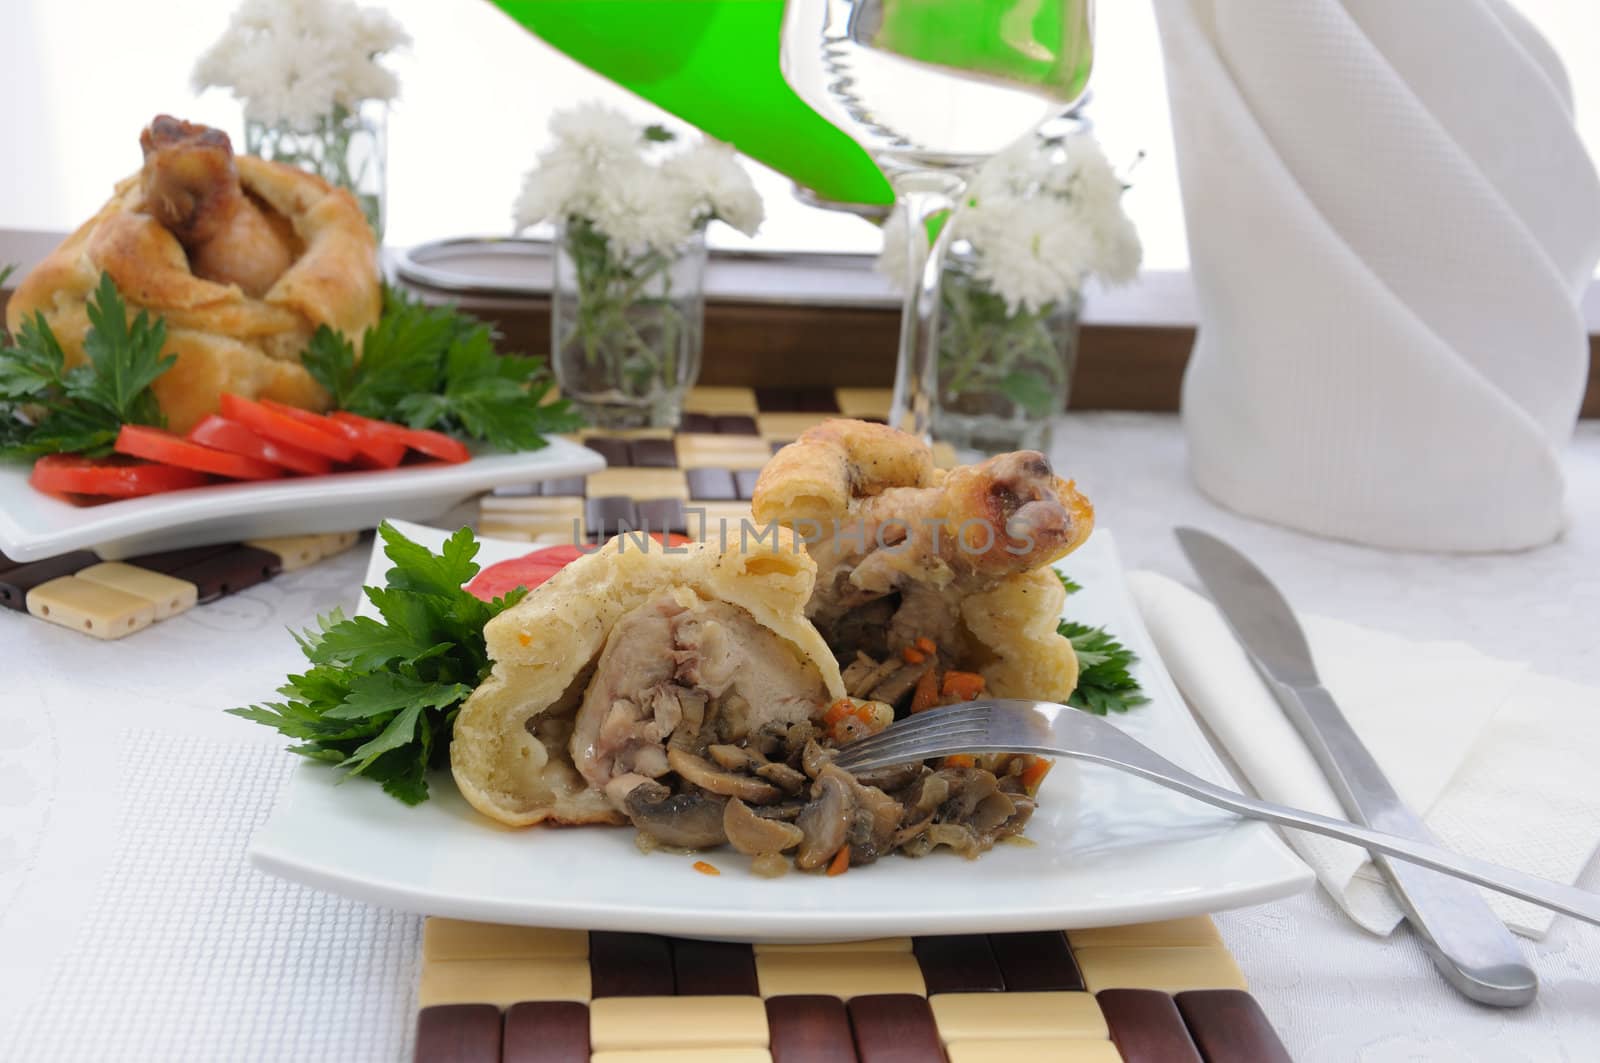 Chicken leg stuffed with mushrooms in pastry (cut) by Apolonia